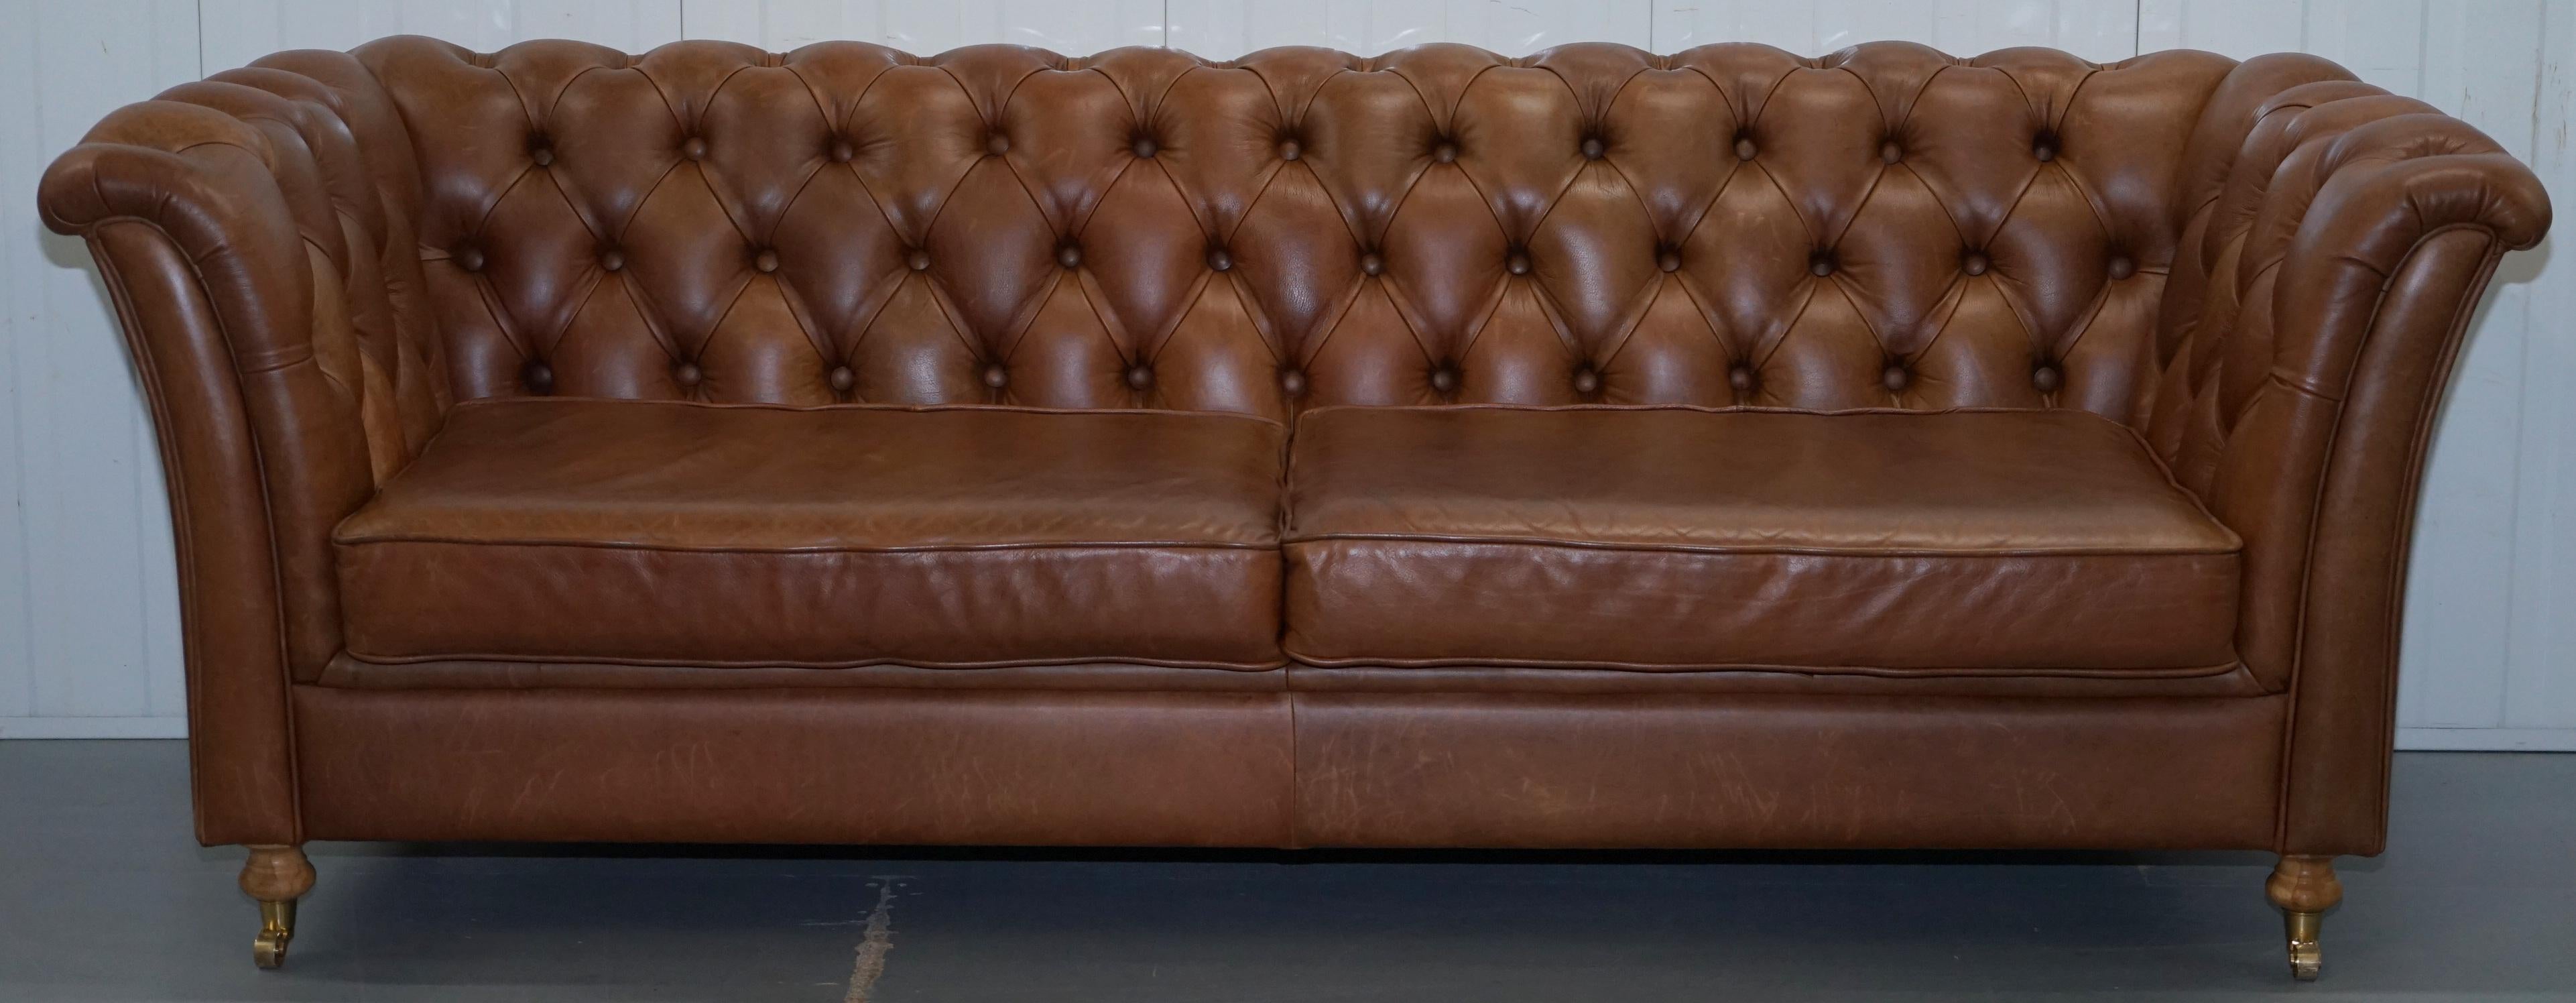 We are delighted to offer for sale this very nice sculptural Chesterfield Chestnut brown leather sofa with oversized buttons

A good looking and well-made piece, it's very very heavy compared to other contemporary Chesterfield sofas, the frame is